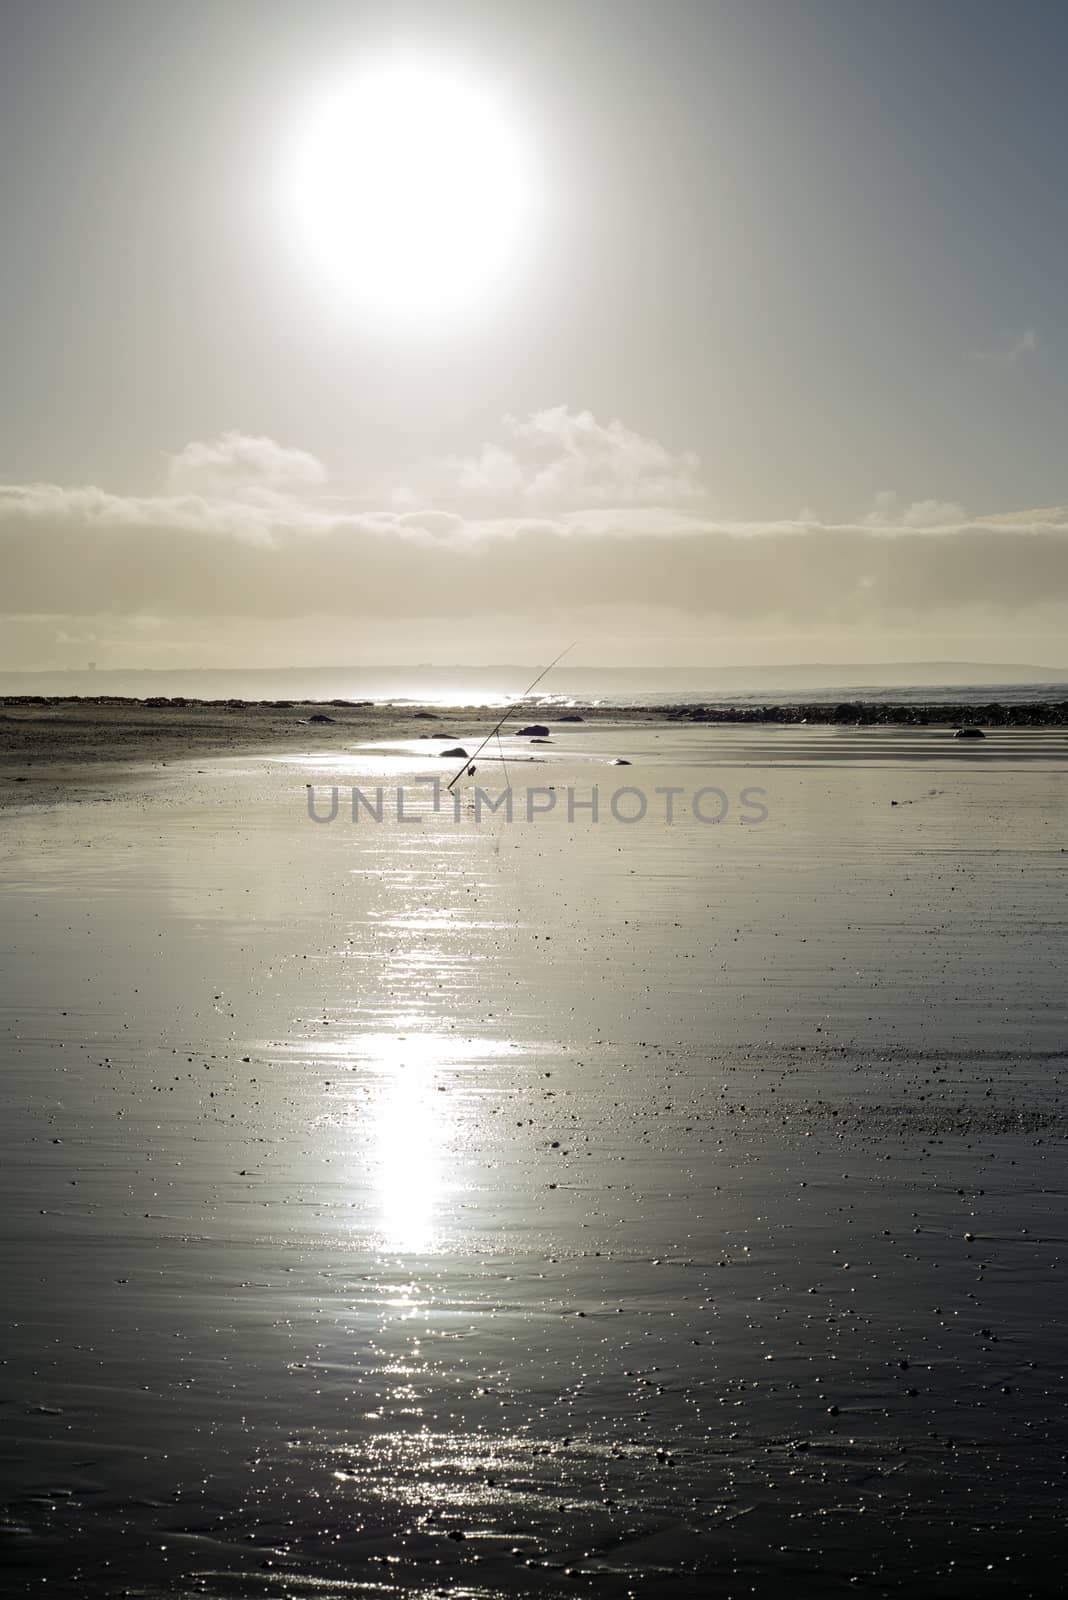 mounted fishing rod on a sunset beach in county Kerry Ireland